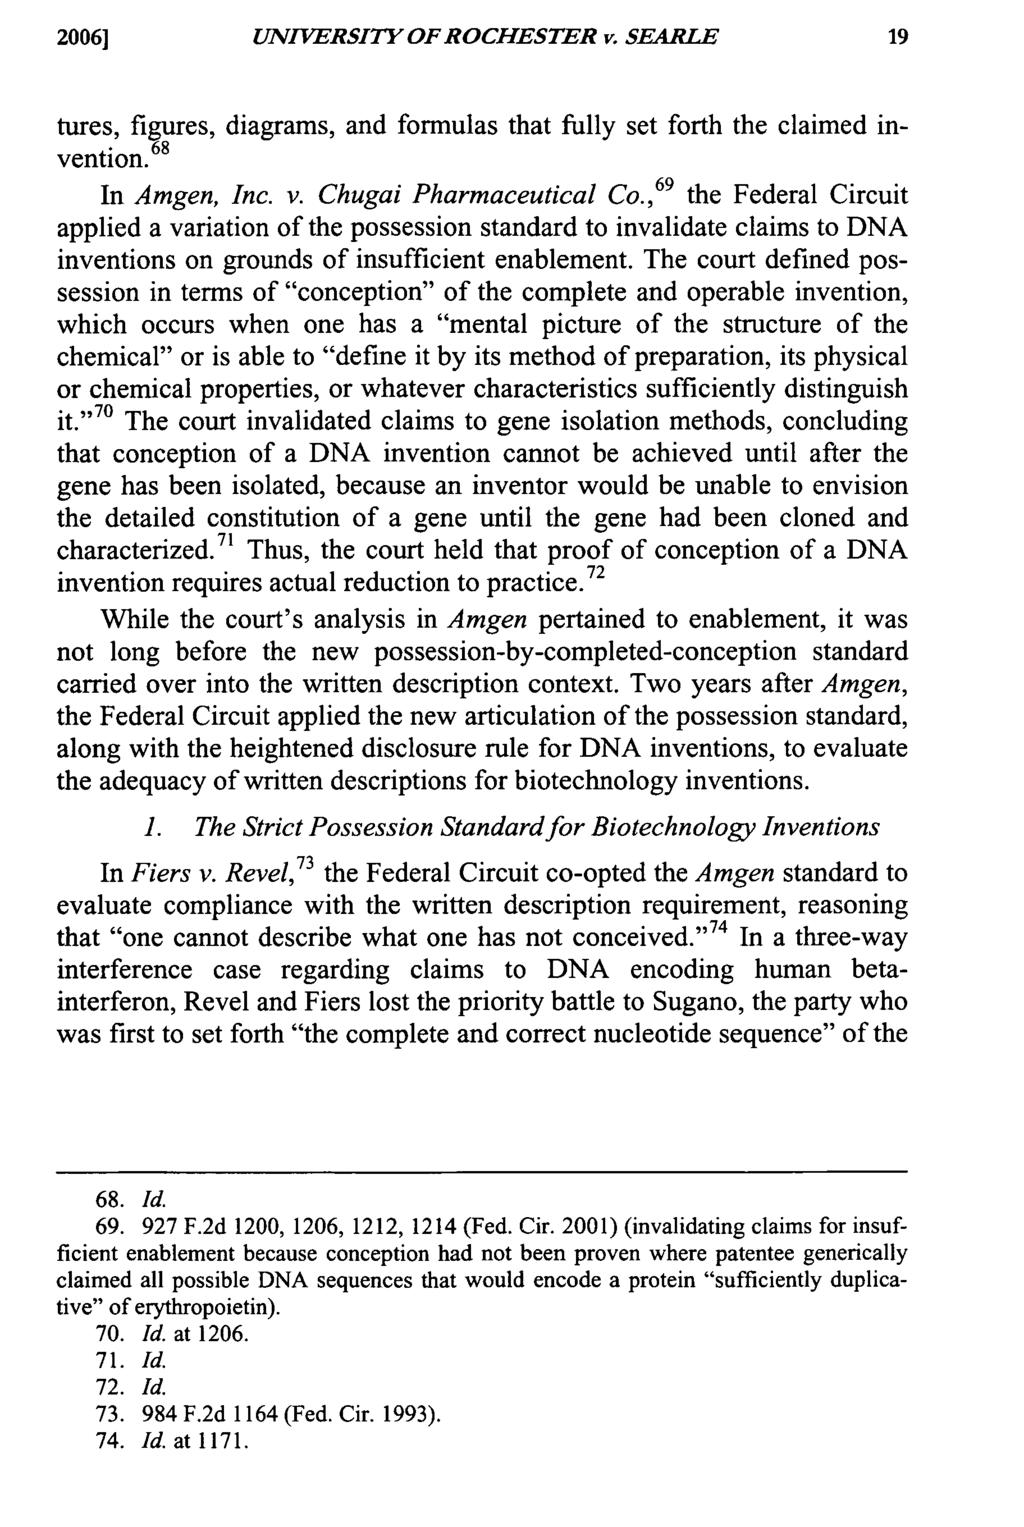 2006] UNIVERSITY OF ROCHESTER v. SEARLE tures, figures, diagrams, and formulas that fully set forth the claimed invention. 68 In Amgen, Inc. v. Chugai Pharmaceutical Co.